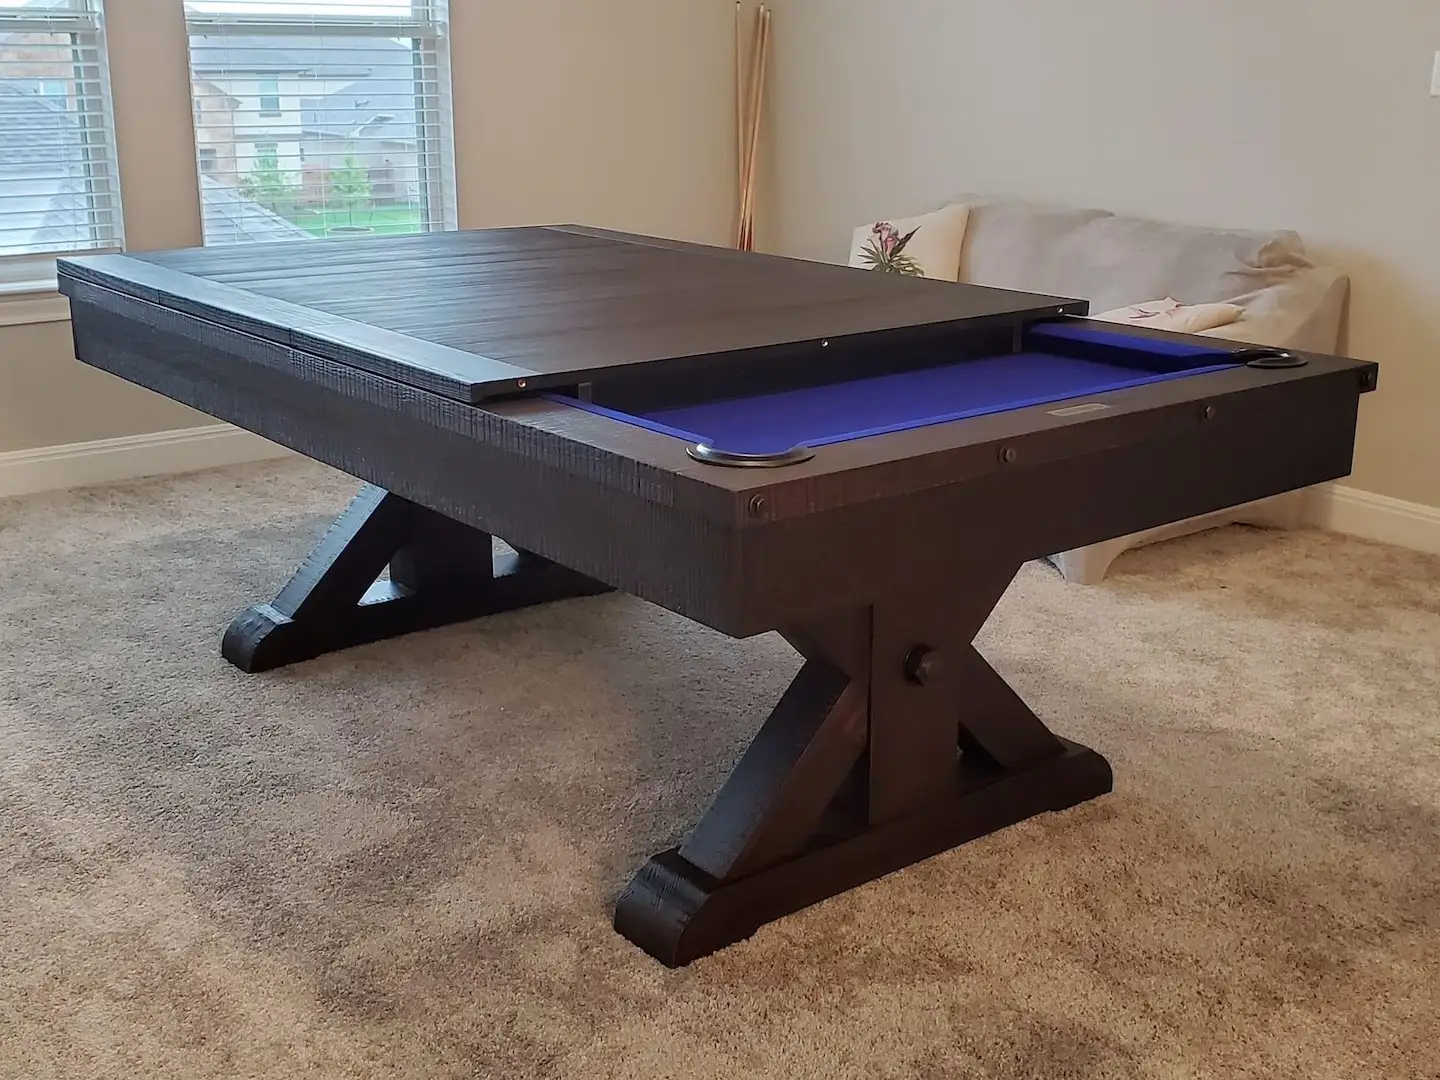 Custom pool table with purple felt and a table topper.